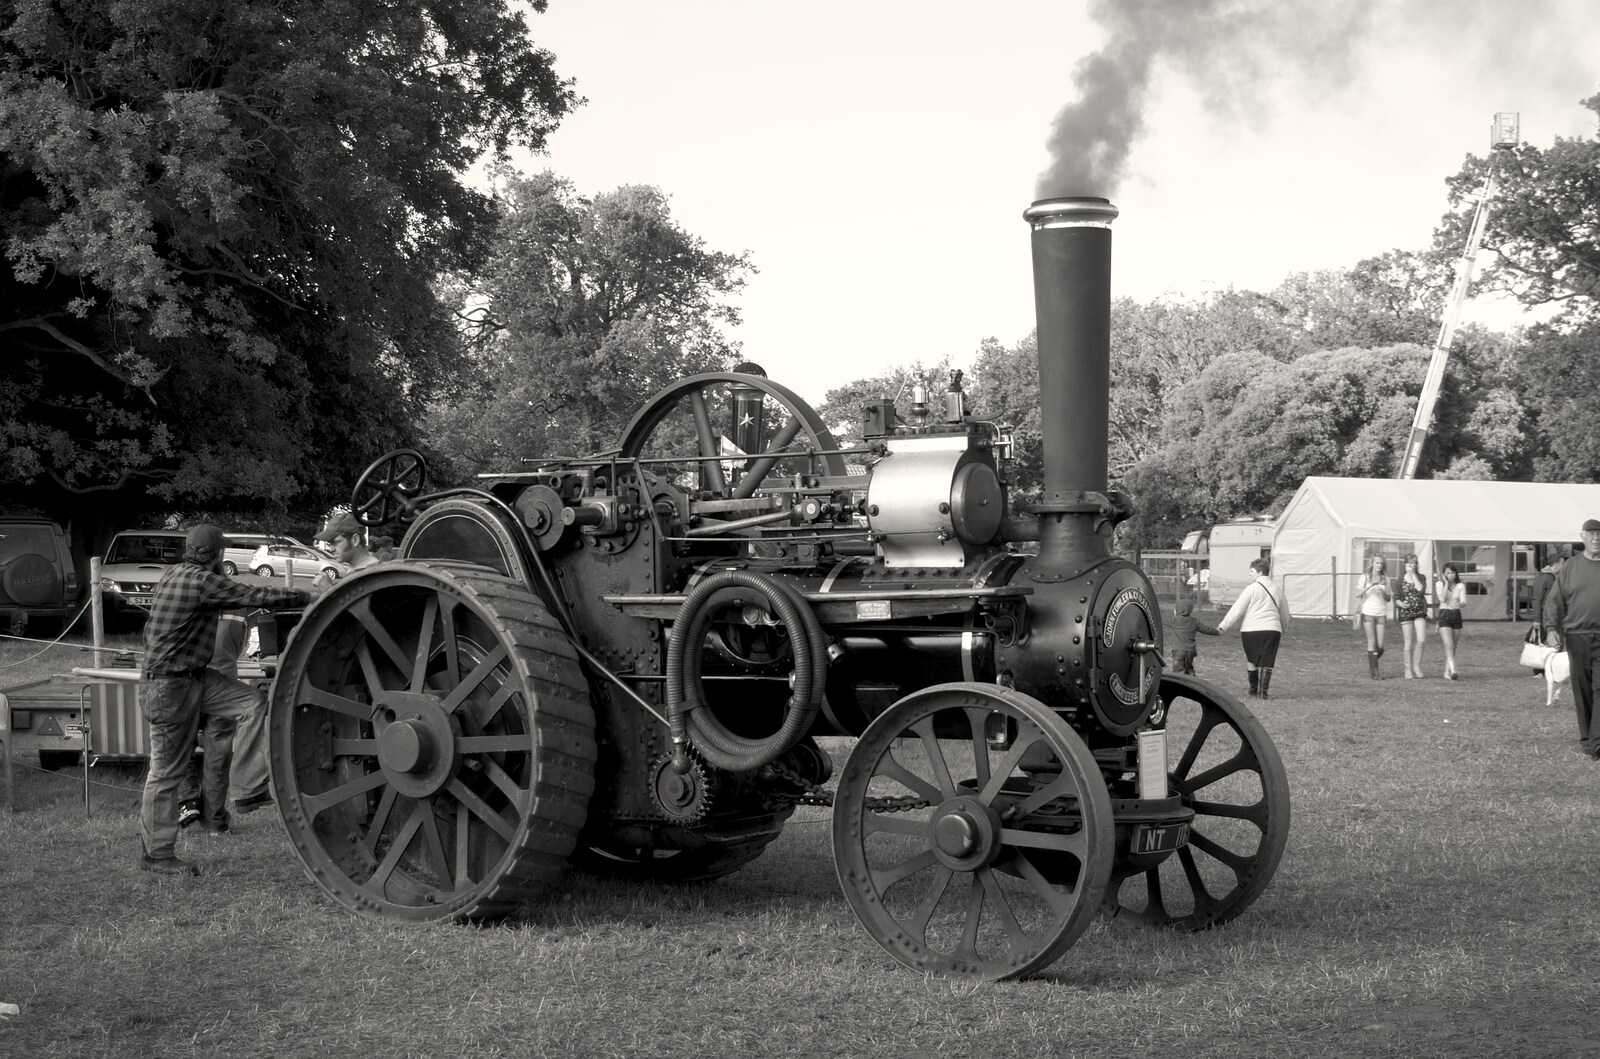 A smoking traction engine from The Eye Show, Palgrave, Suffolk - 30th August 2010